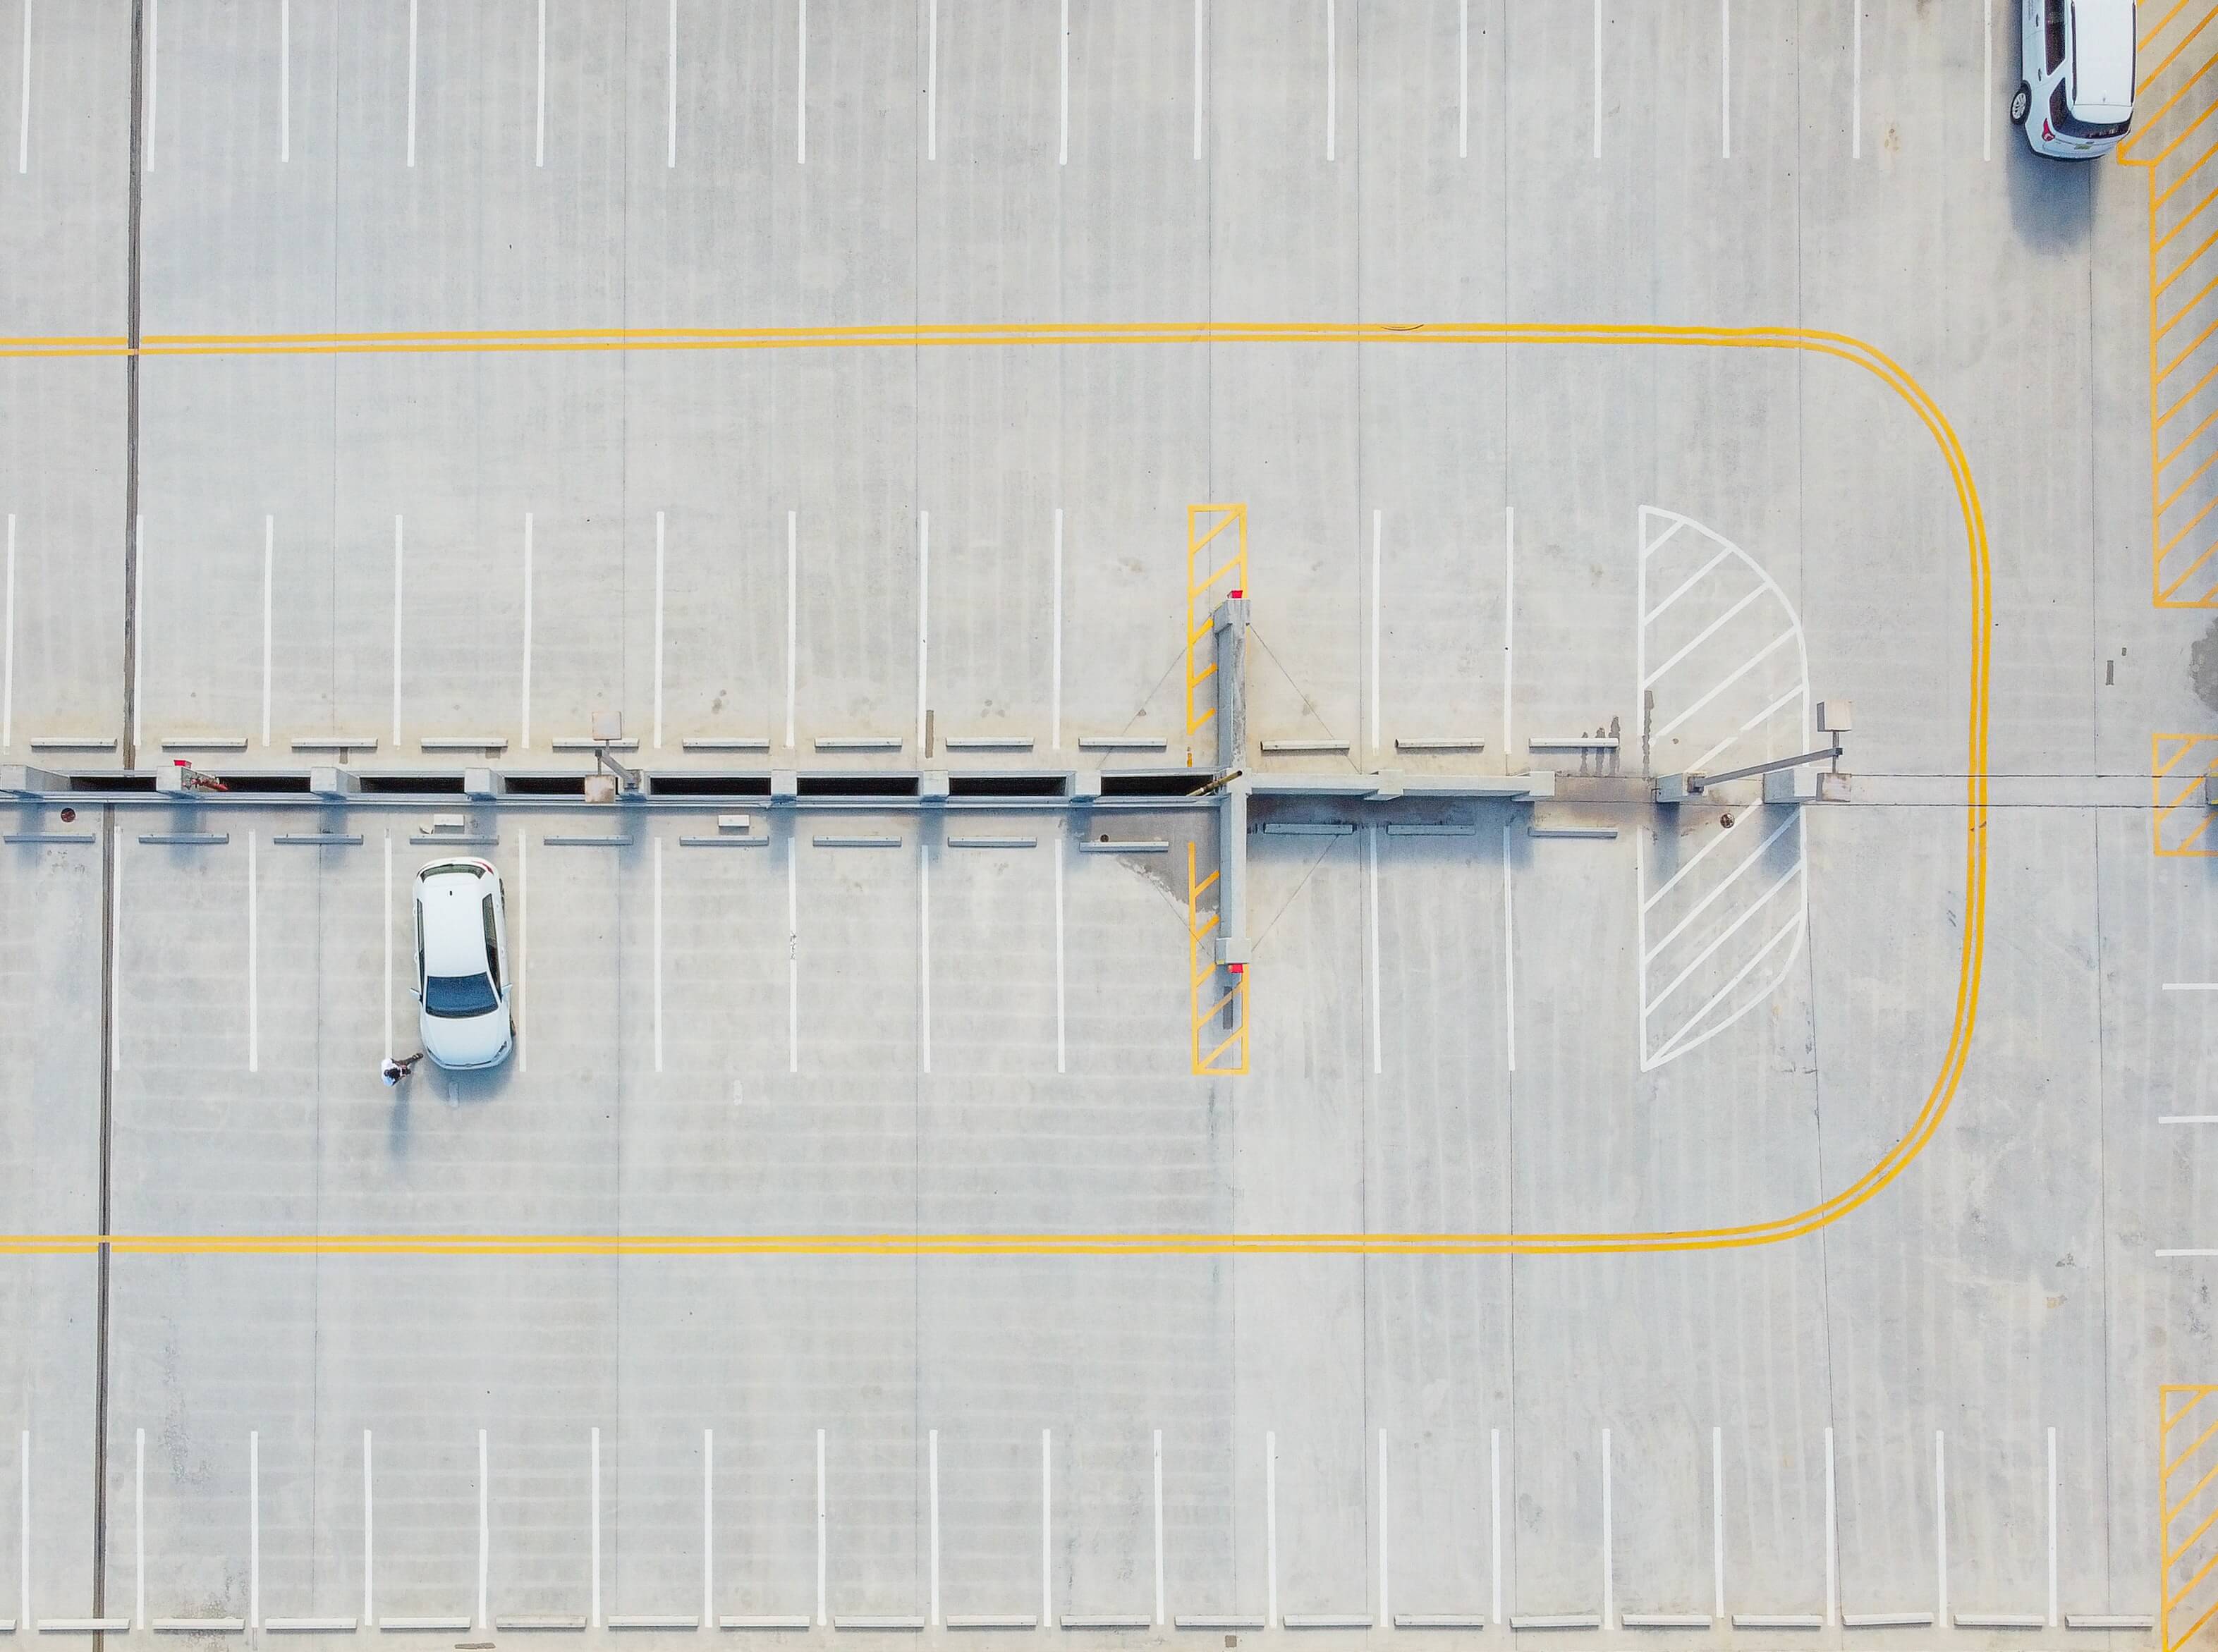 An aerial shot of a parking lot with one car parked in it